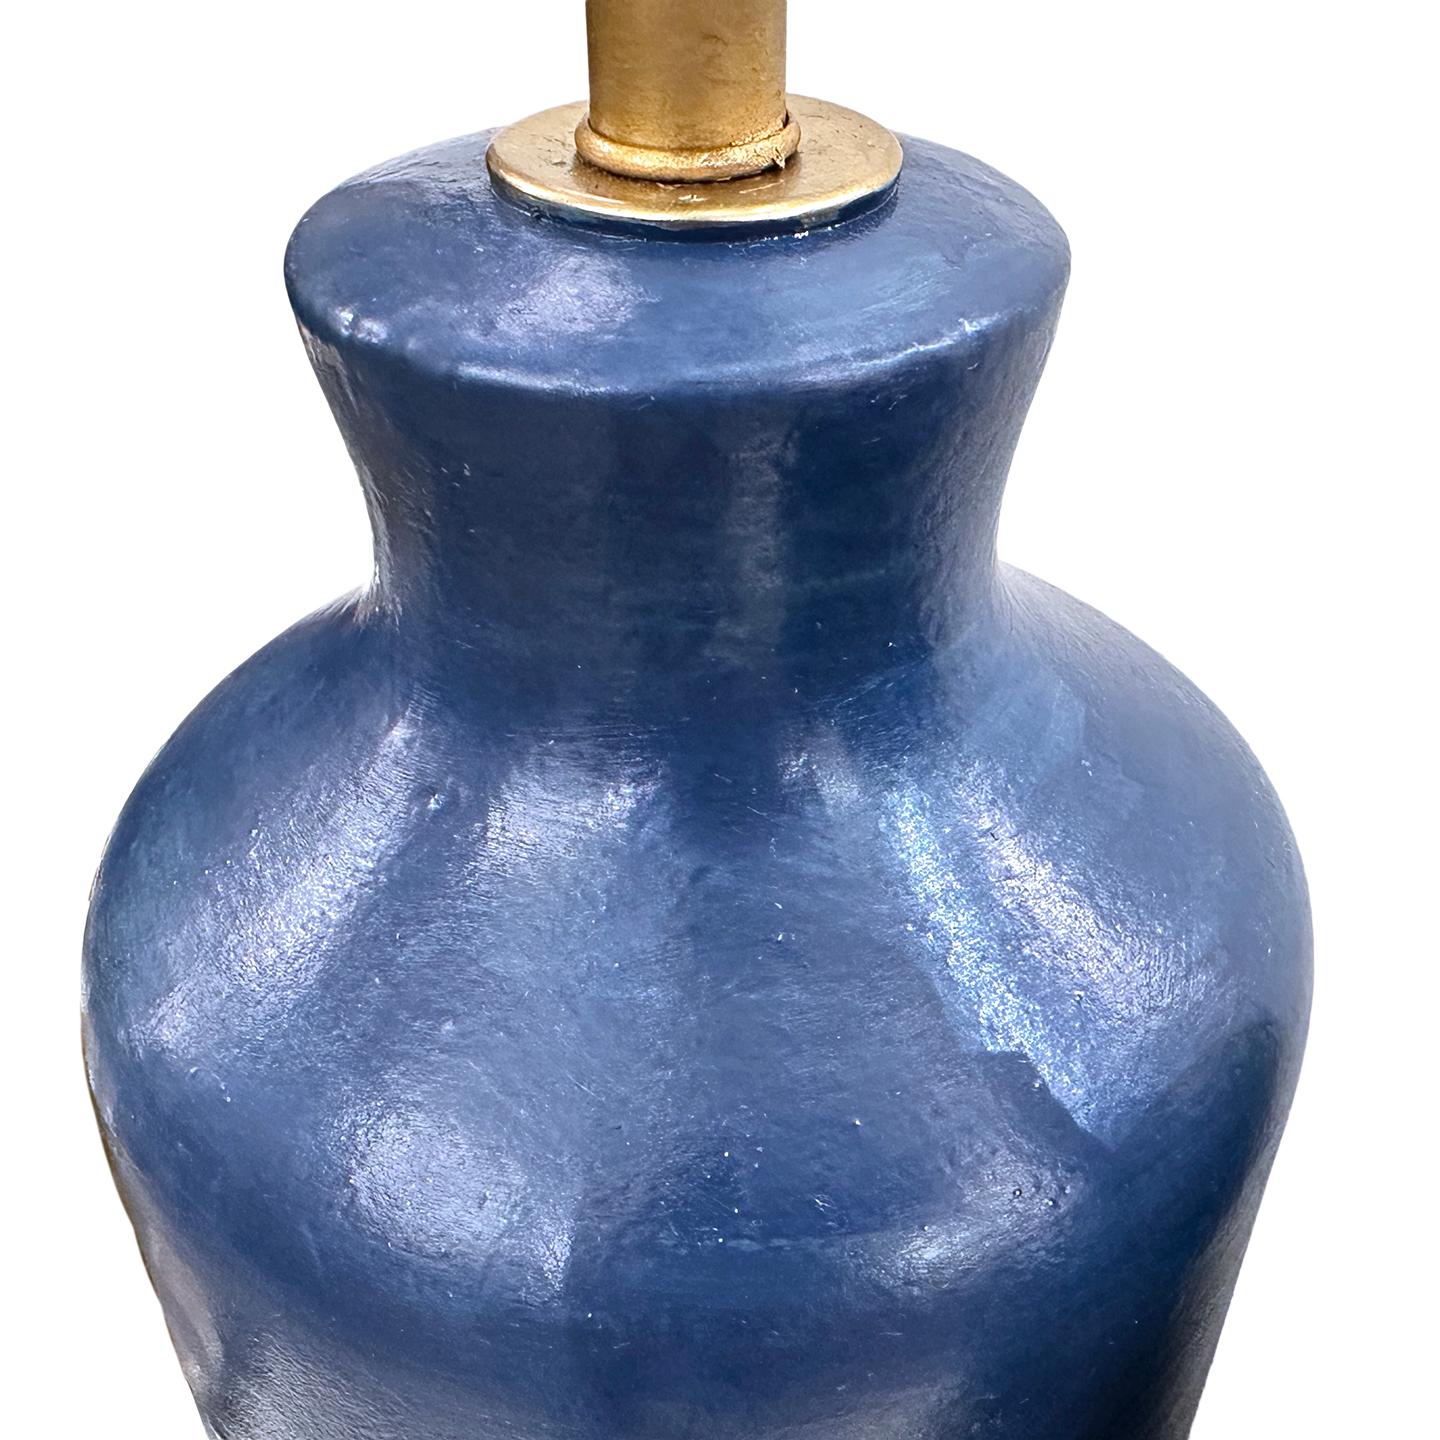 Pair of Italian circa 1960's blue ceramic table lamps.

Measurements:
Height of body: 17